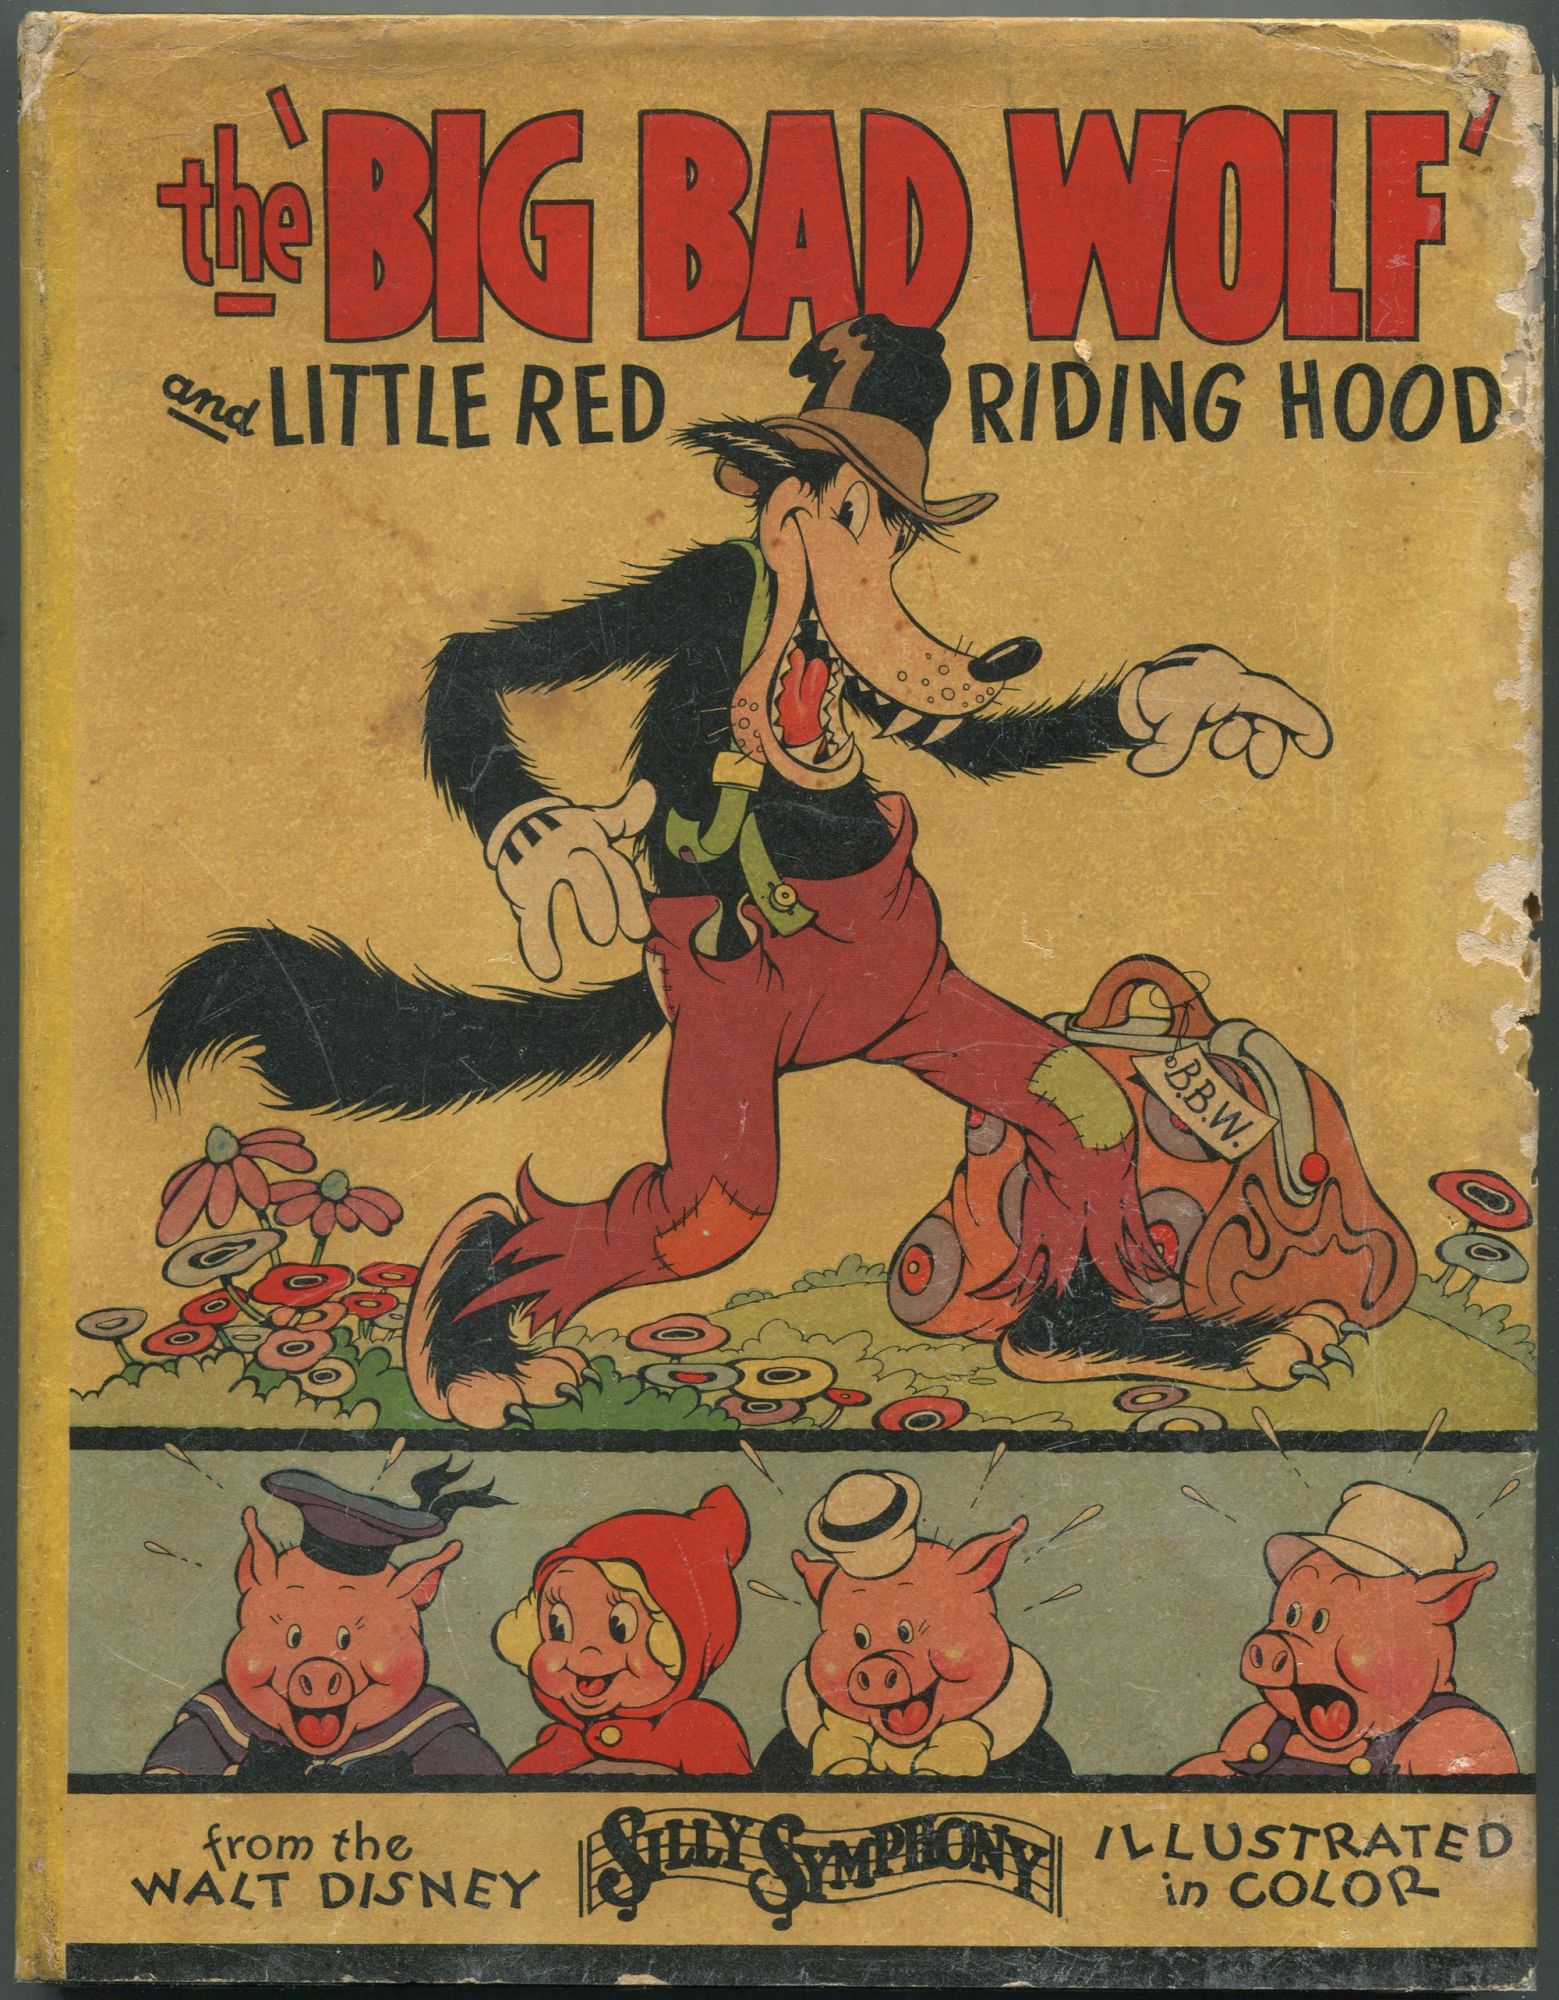 Big Bad Wolf and Little Red Riding Hood | Story and, the Staff of the Walt Disney